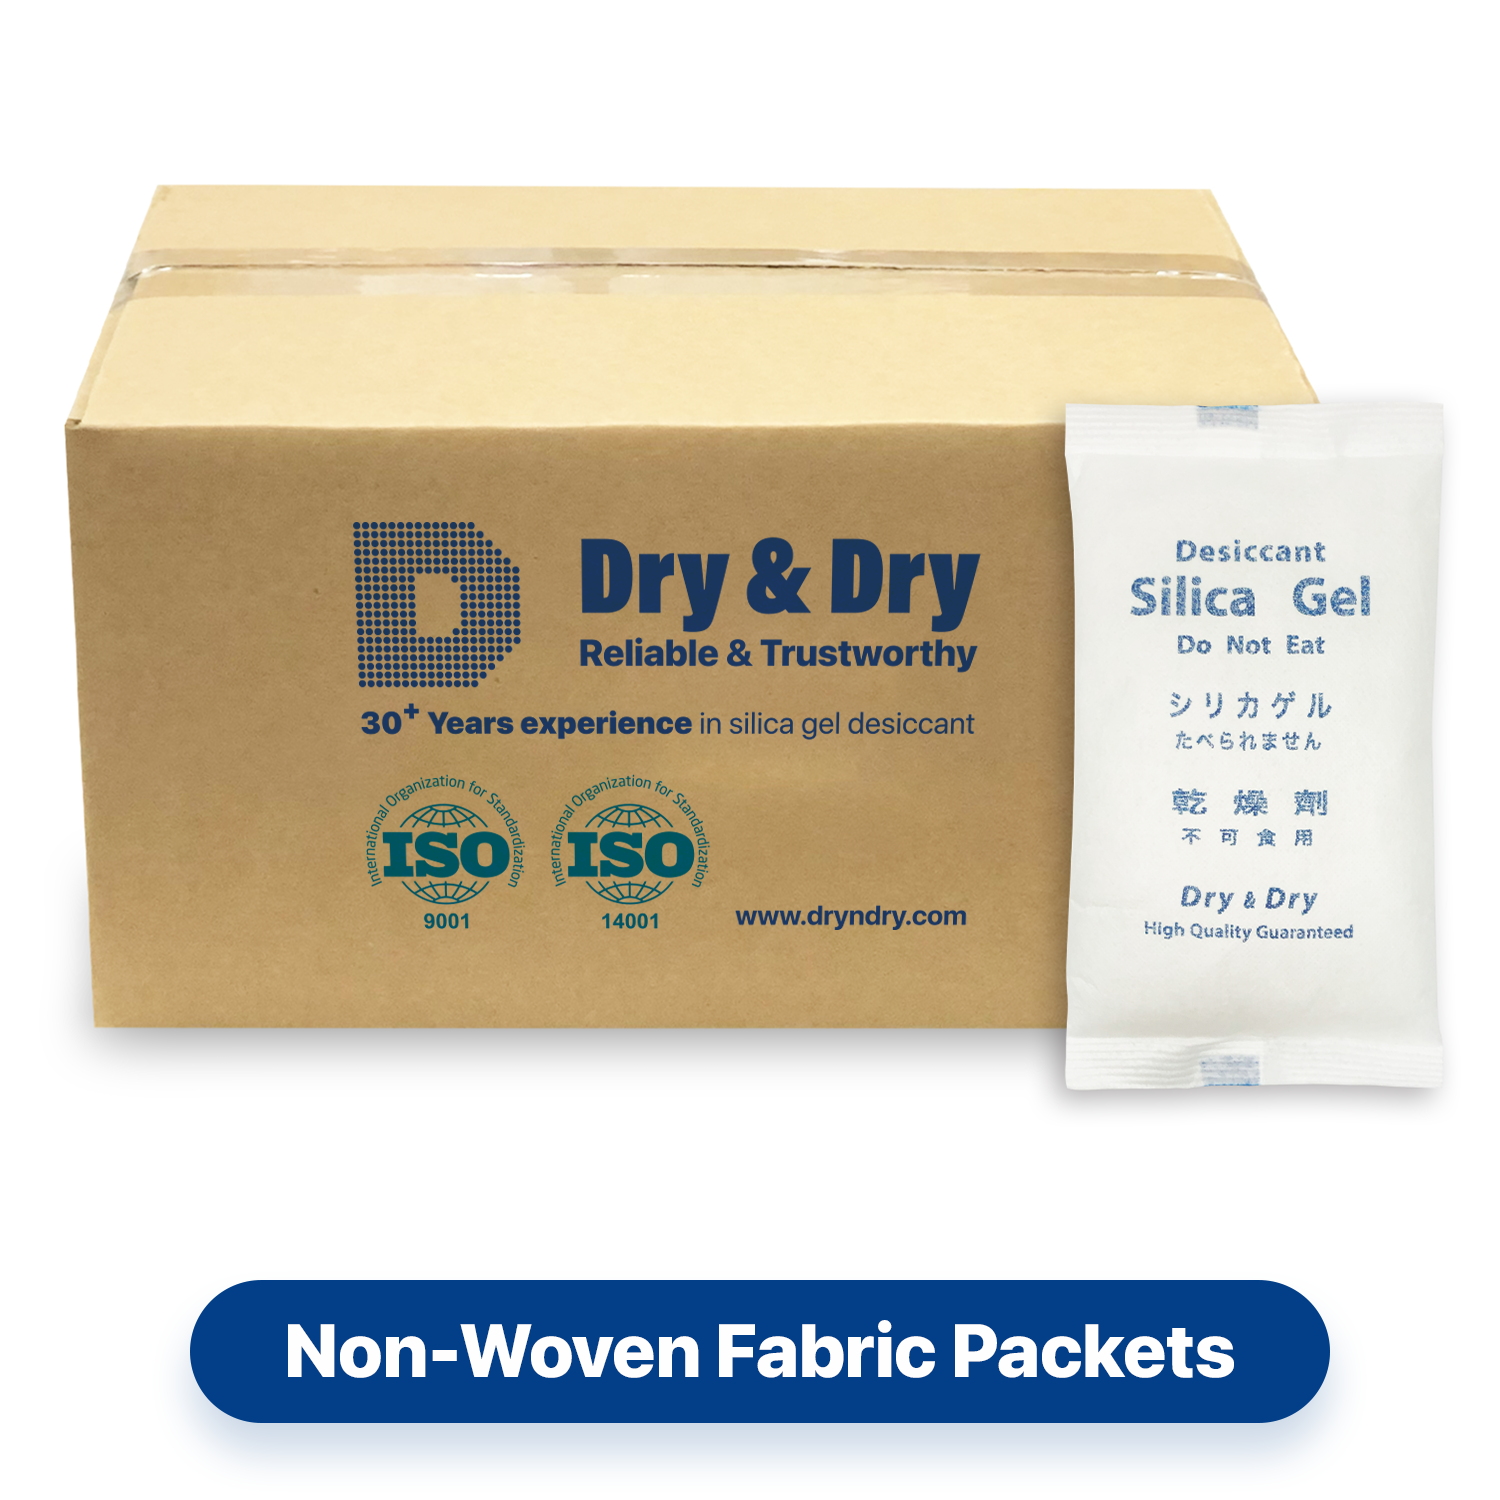 500 Gram [120 Packets]  "Dry & Dry" Premium Silica Gel Desiccant Packets - Rechargeable Non-Woven Fabric (Cloth)